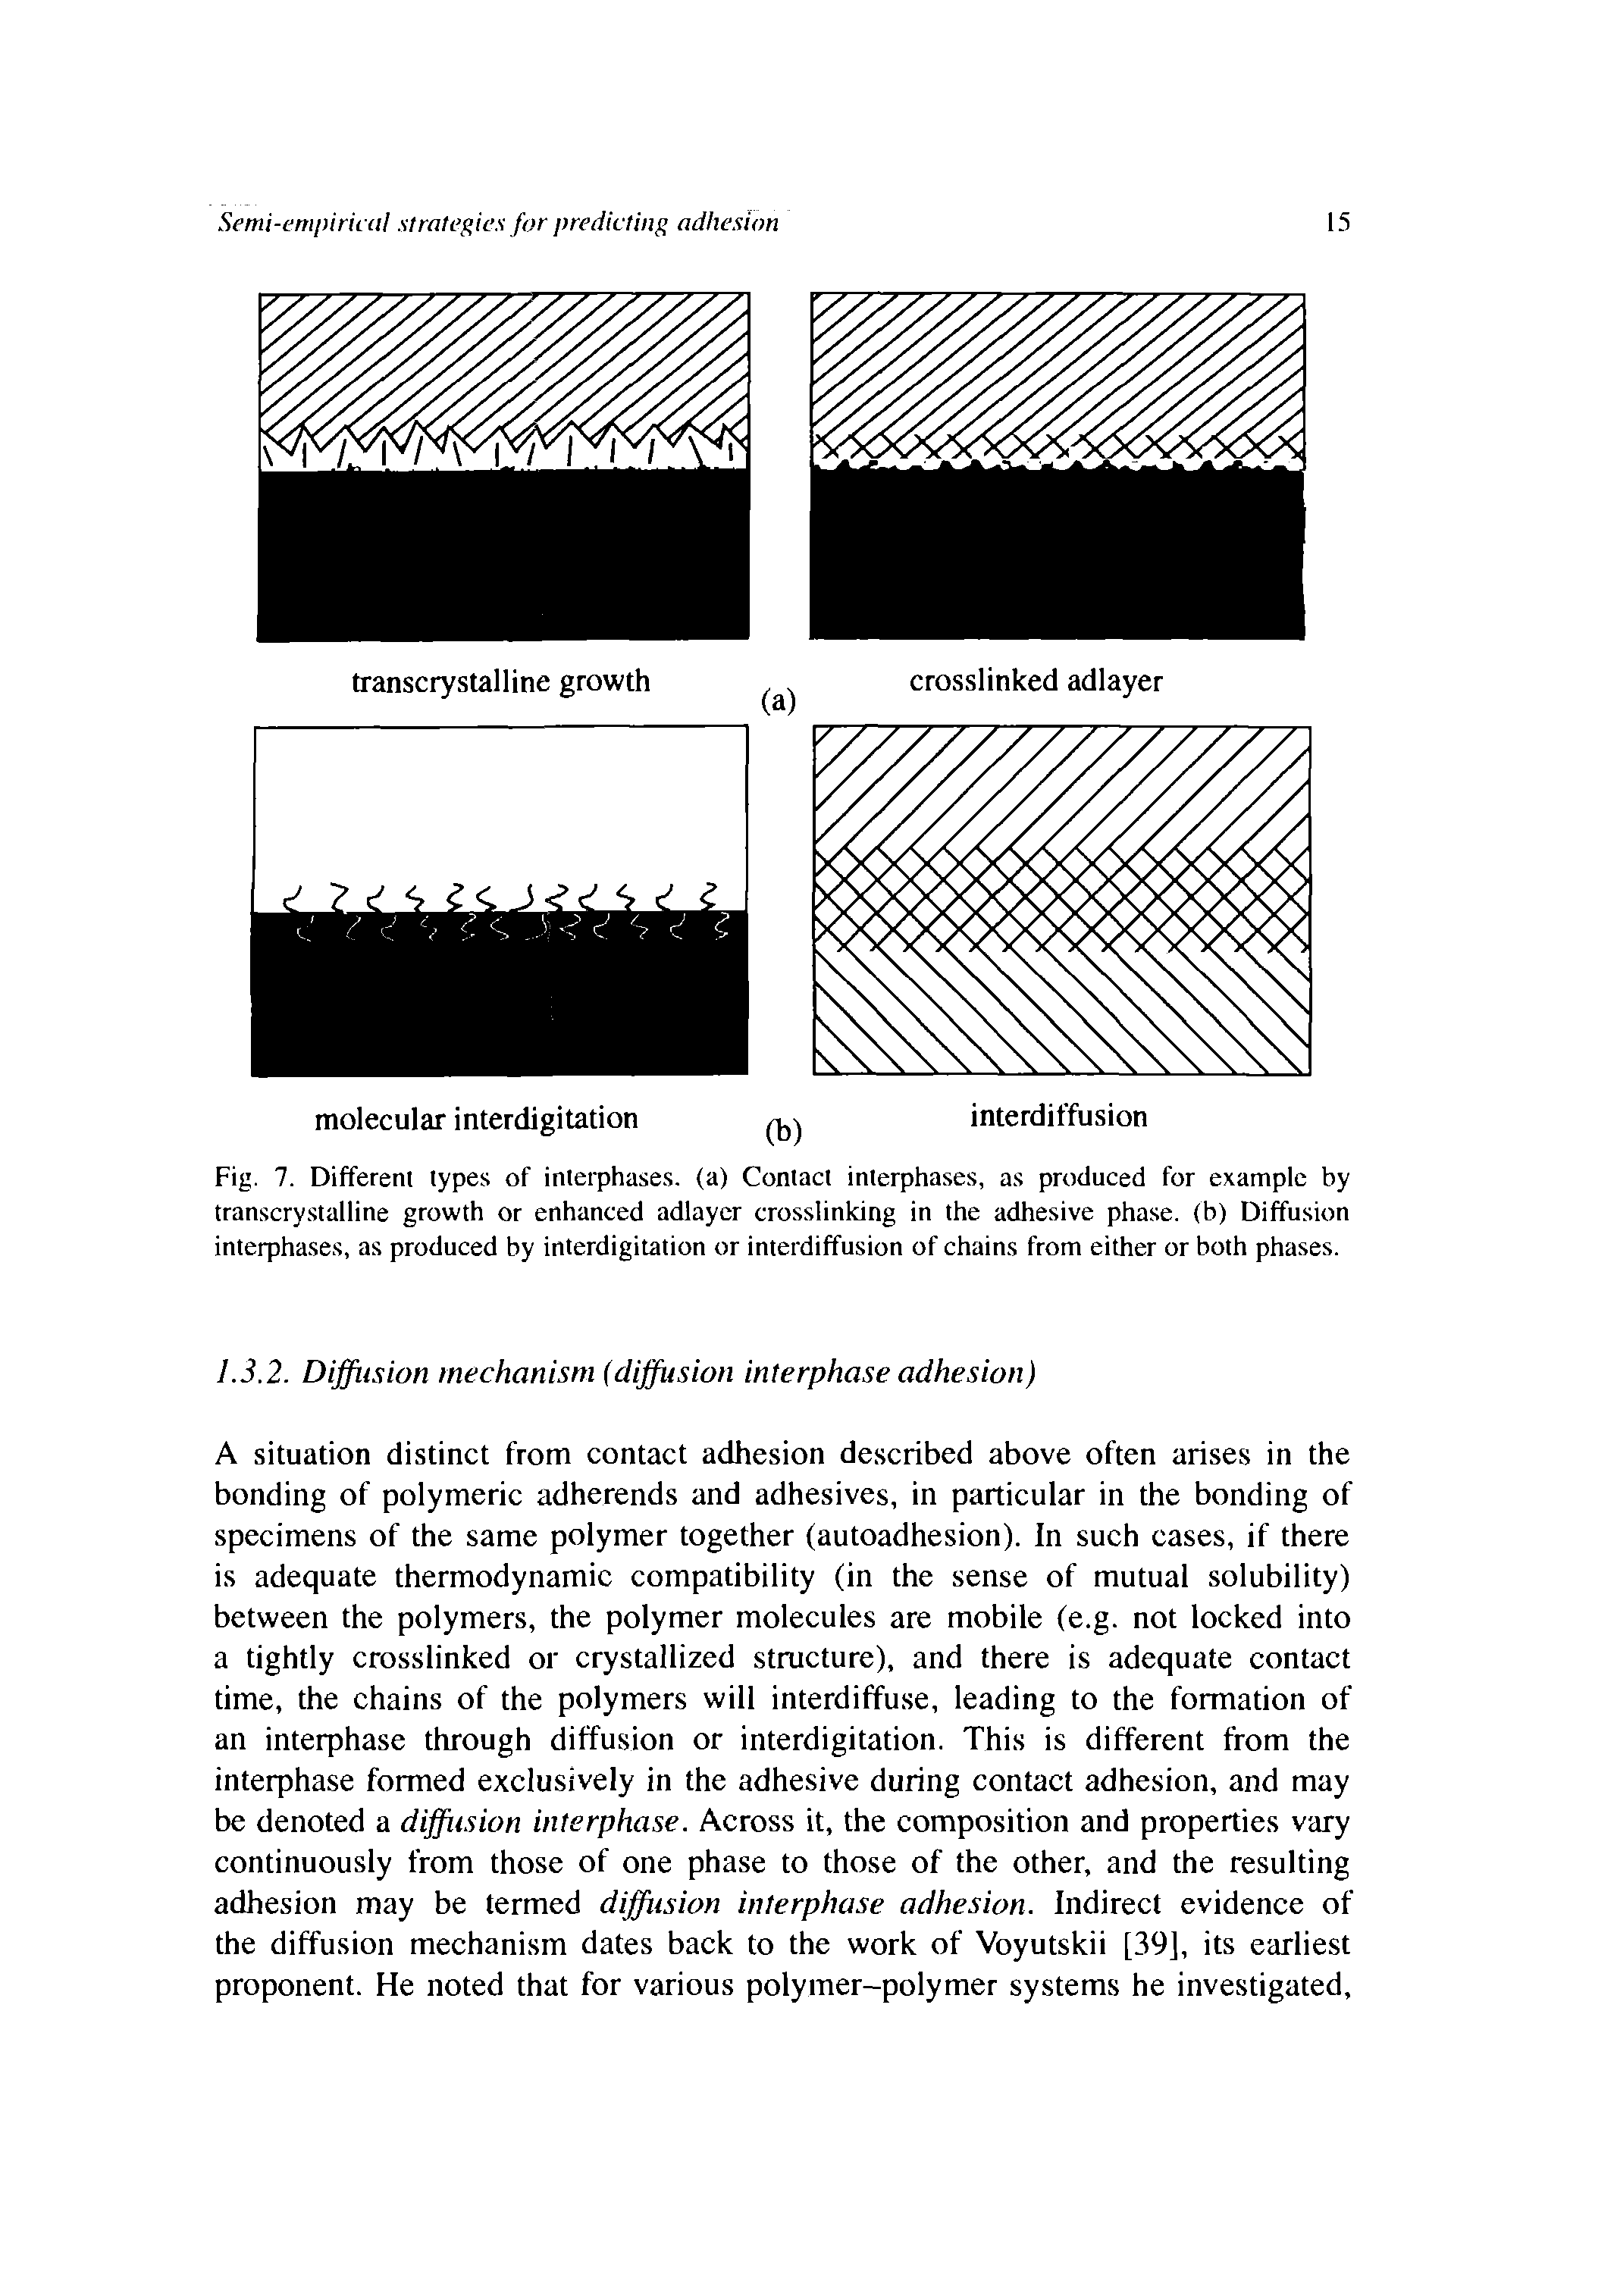 Fig. 7. Different types of interphases. (a) Contact interphases, as produced for example by transcrystalline growth or enhanced adlayer crosslinking in the adhesive phase, (b) Diffusion interphases, as produced by interdigitation or interdiffusion of chains from either or both phases.